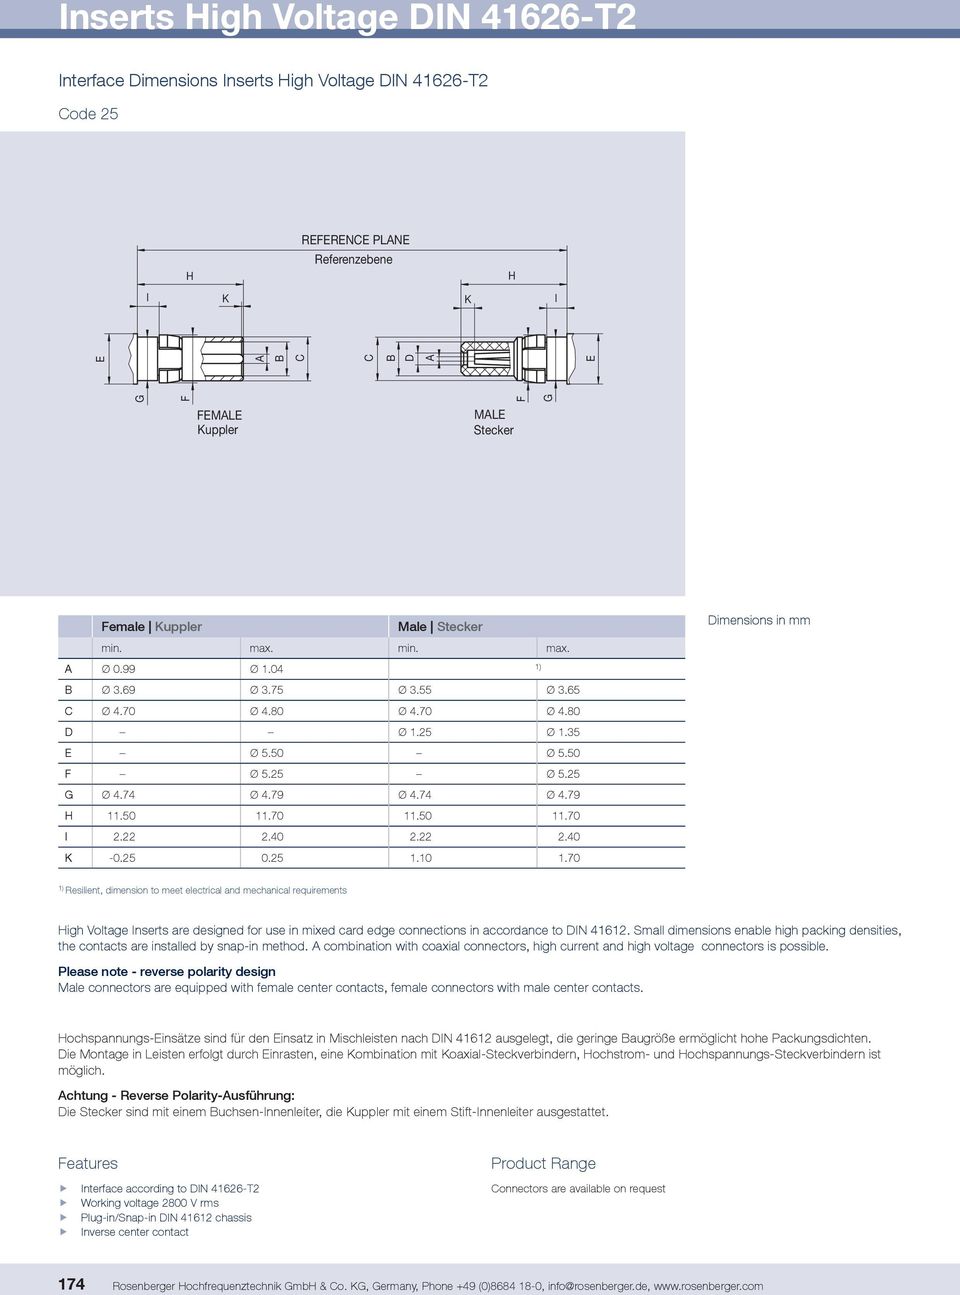 70 imensions in mm 1) Resilient, dimension to meet electrical and mechanical requirements igh Voltage nserts are designed for use in mixed card edge connections in accordance to N 41612.